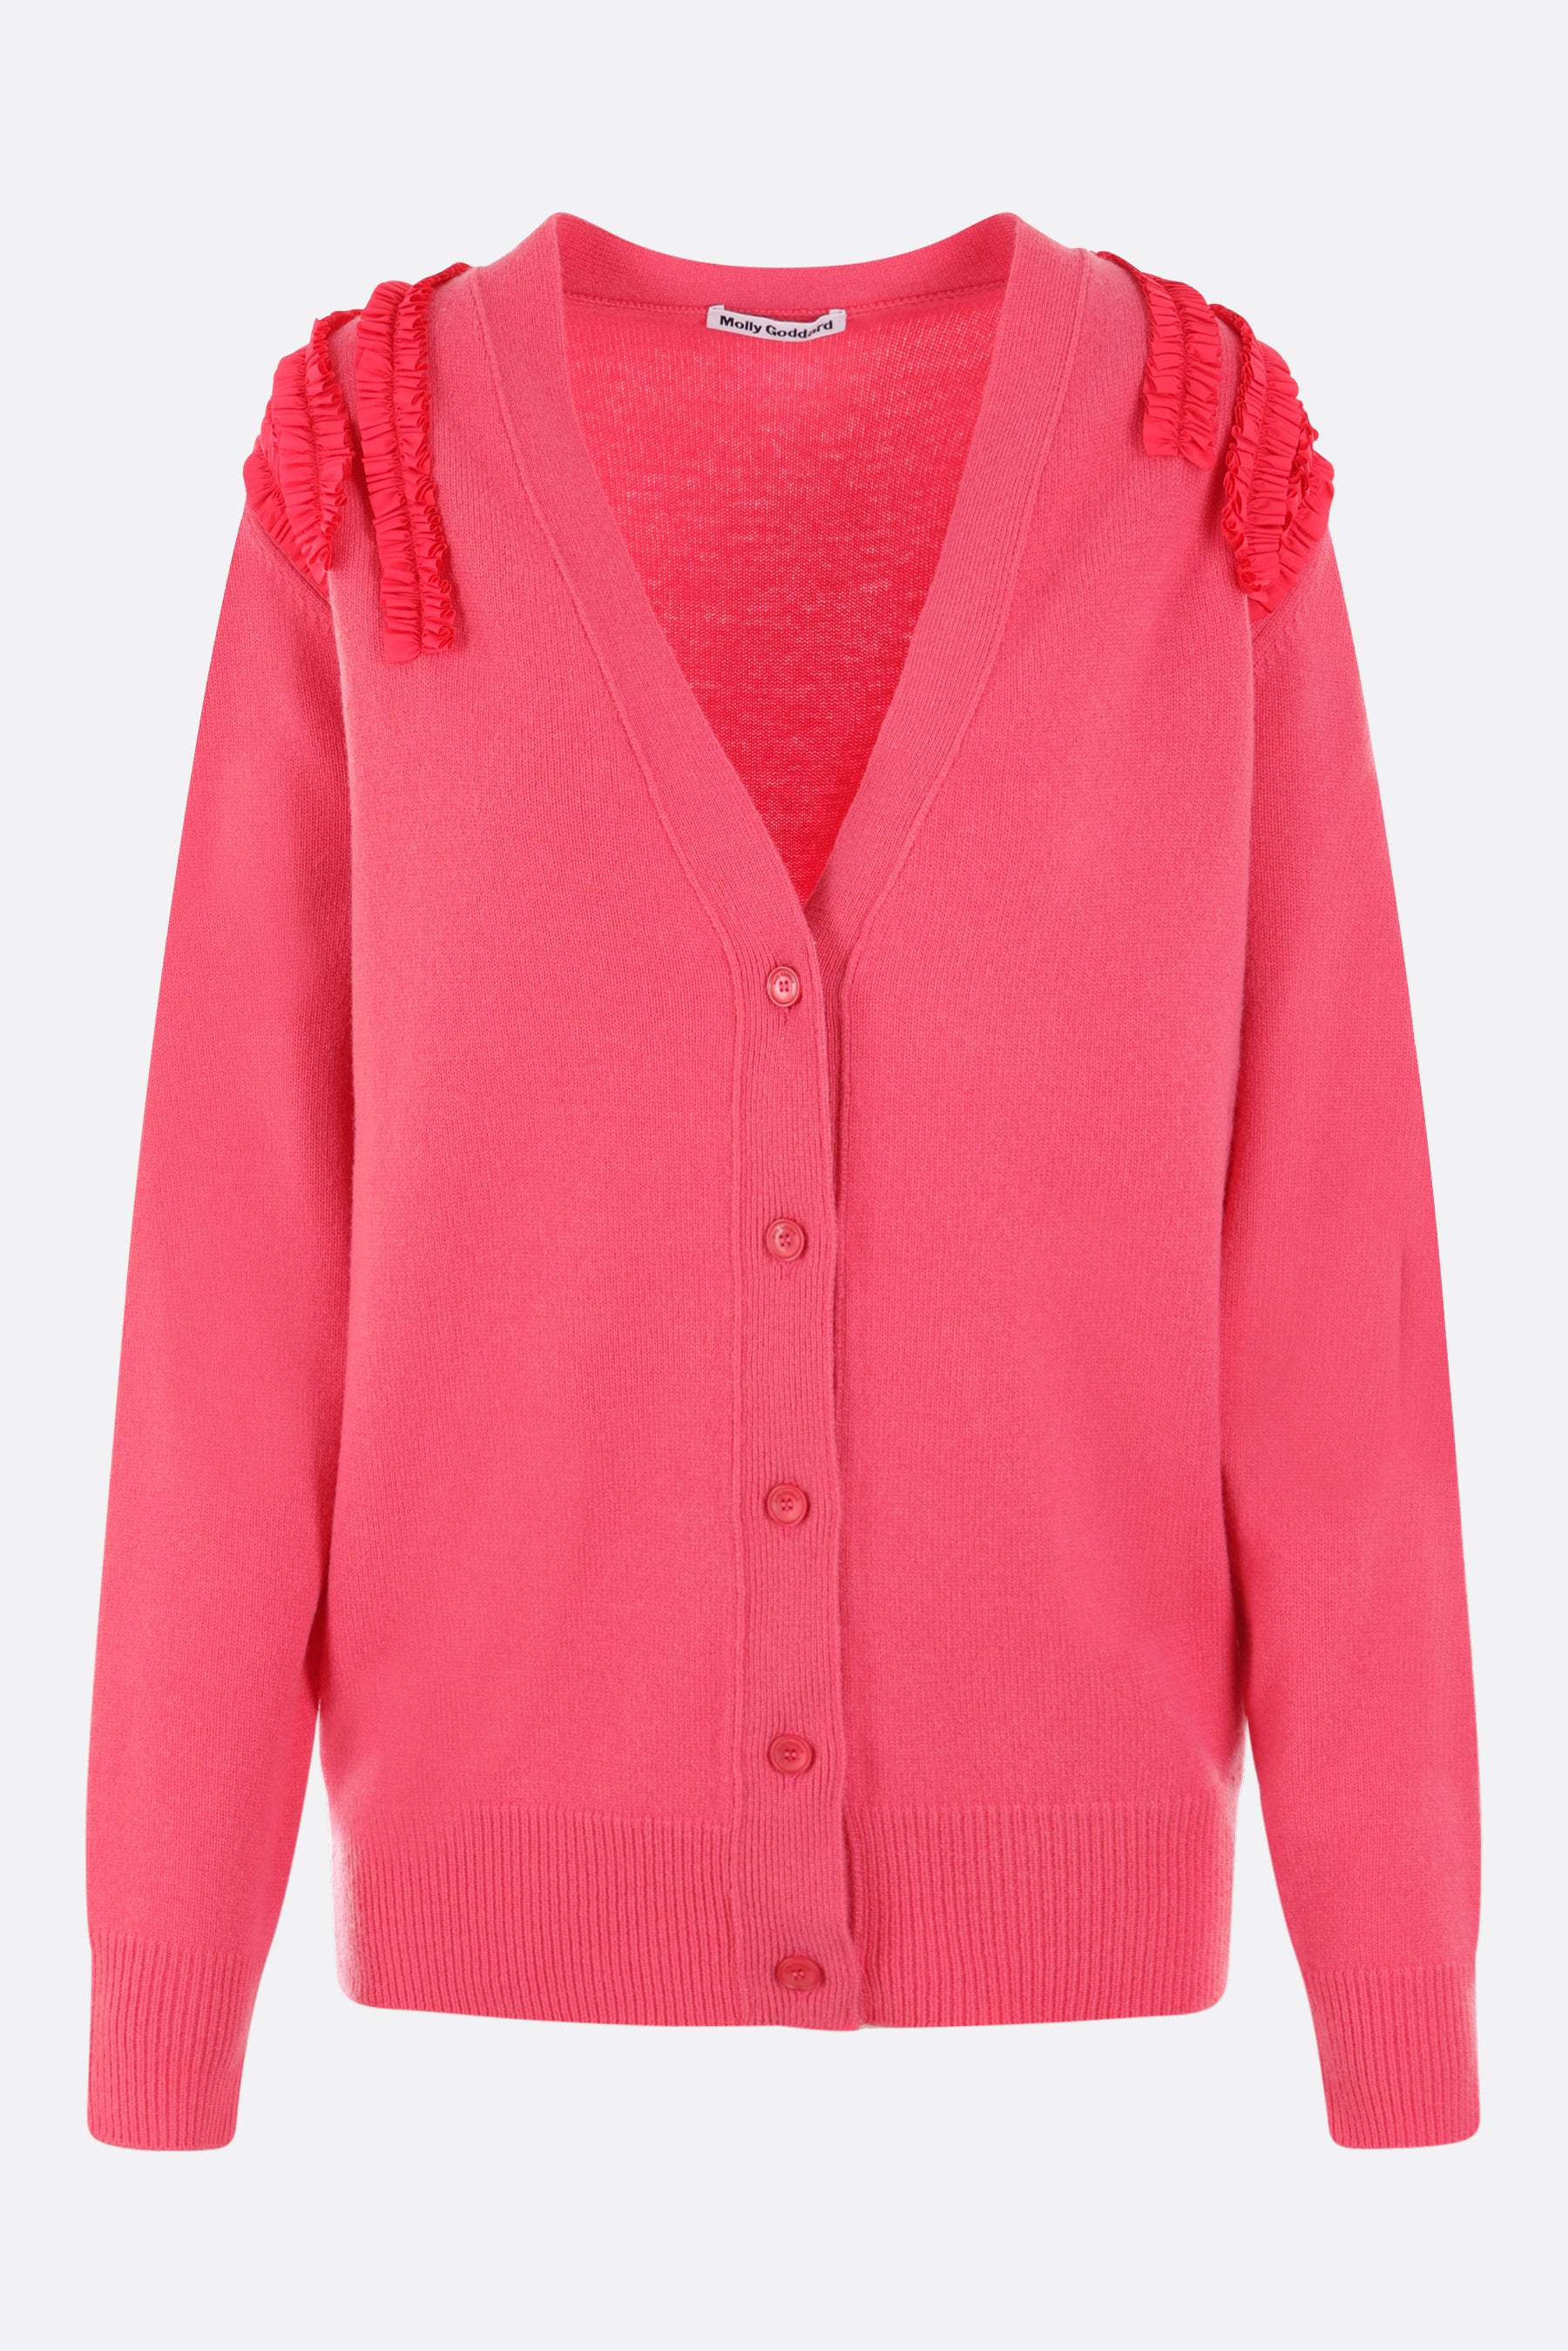 cardigan Sally in lana e cashmere con rouches